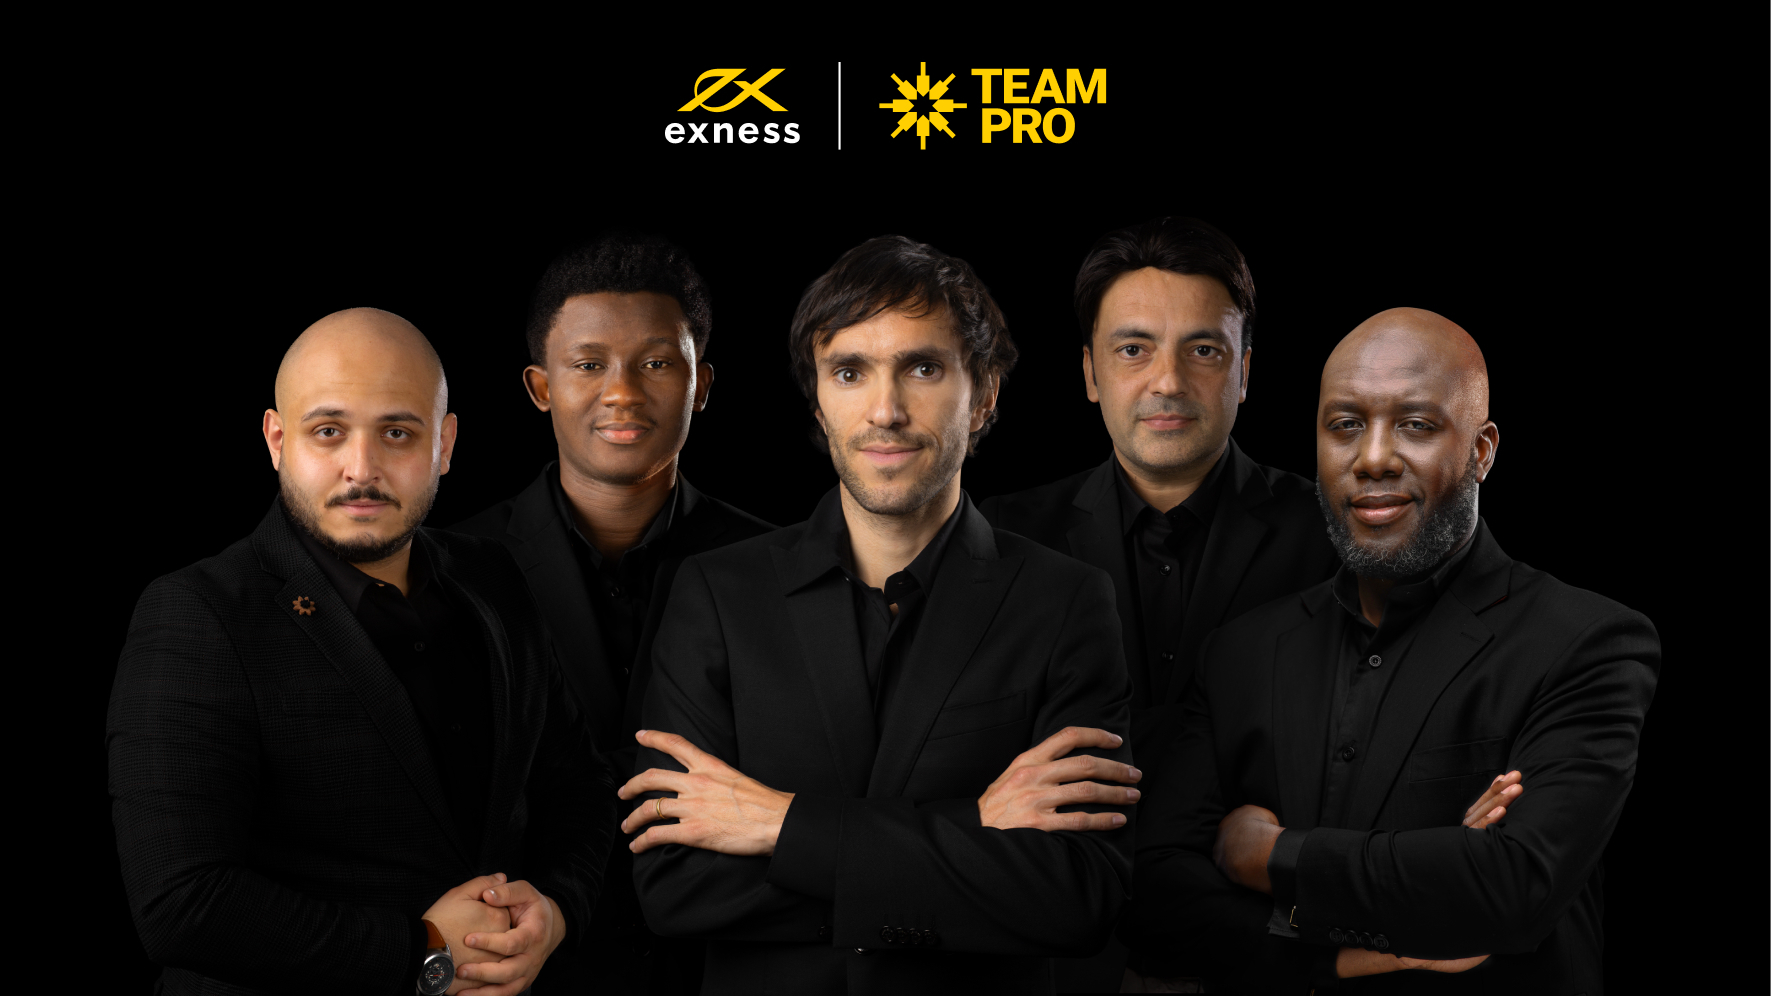 The Exness Team Pro Group